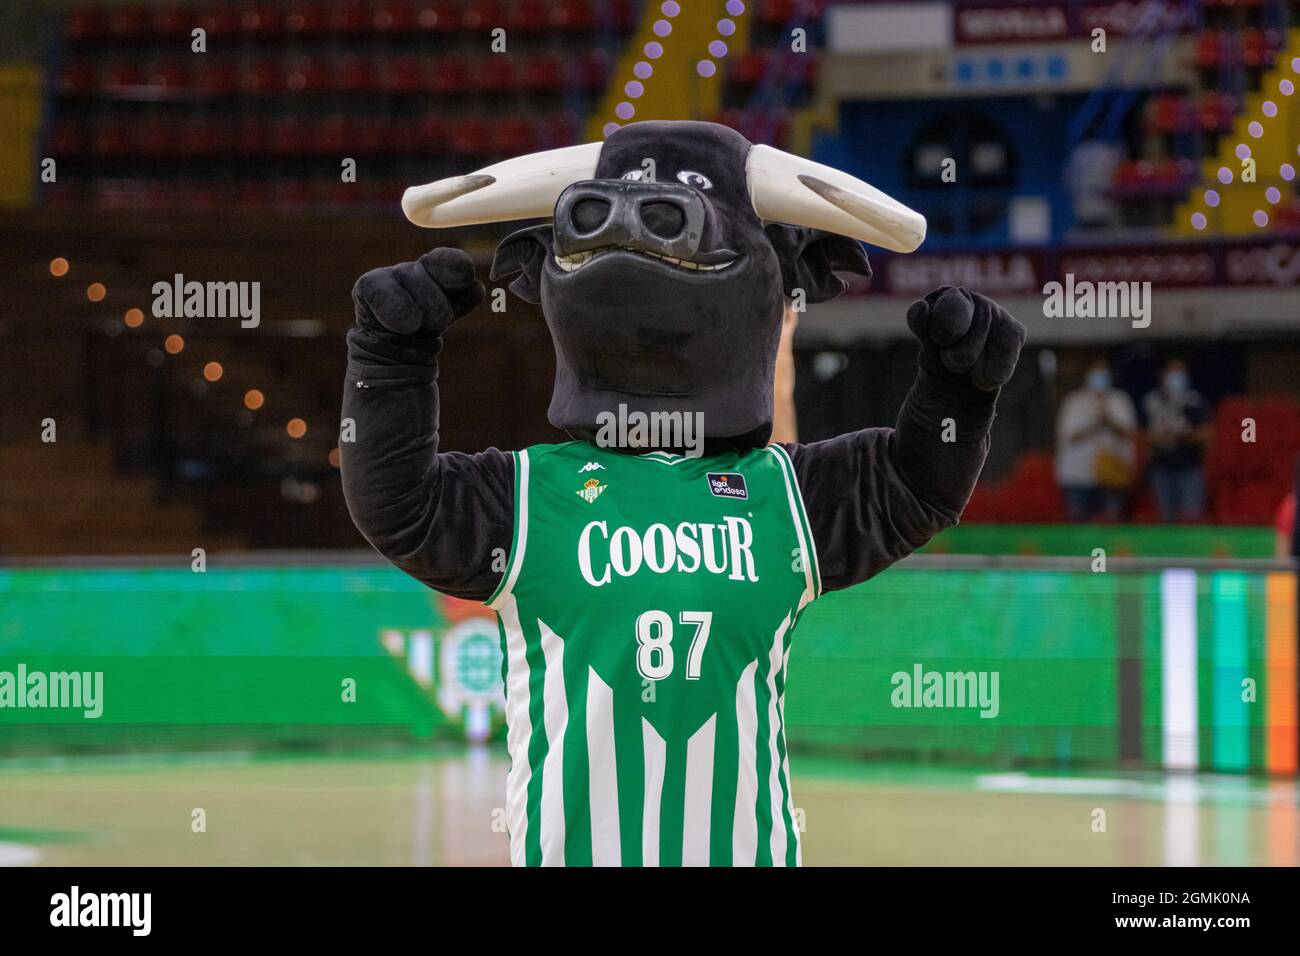 SEVILLE, Spain. 18th Sep, 2021. Mascot of Coosur Real Betis celebrating the  victory during the ACB League's match between Coosur Real Betis and  MoraBanc Andorra at San Pablo Sport Centre, Seville, Spain.Credit: